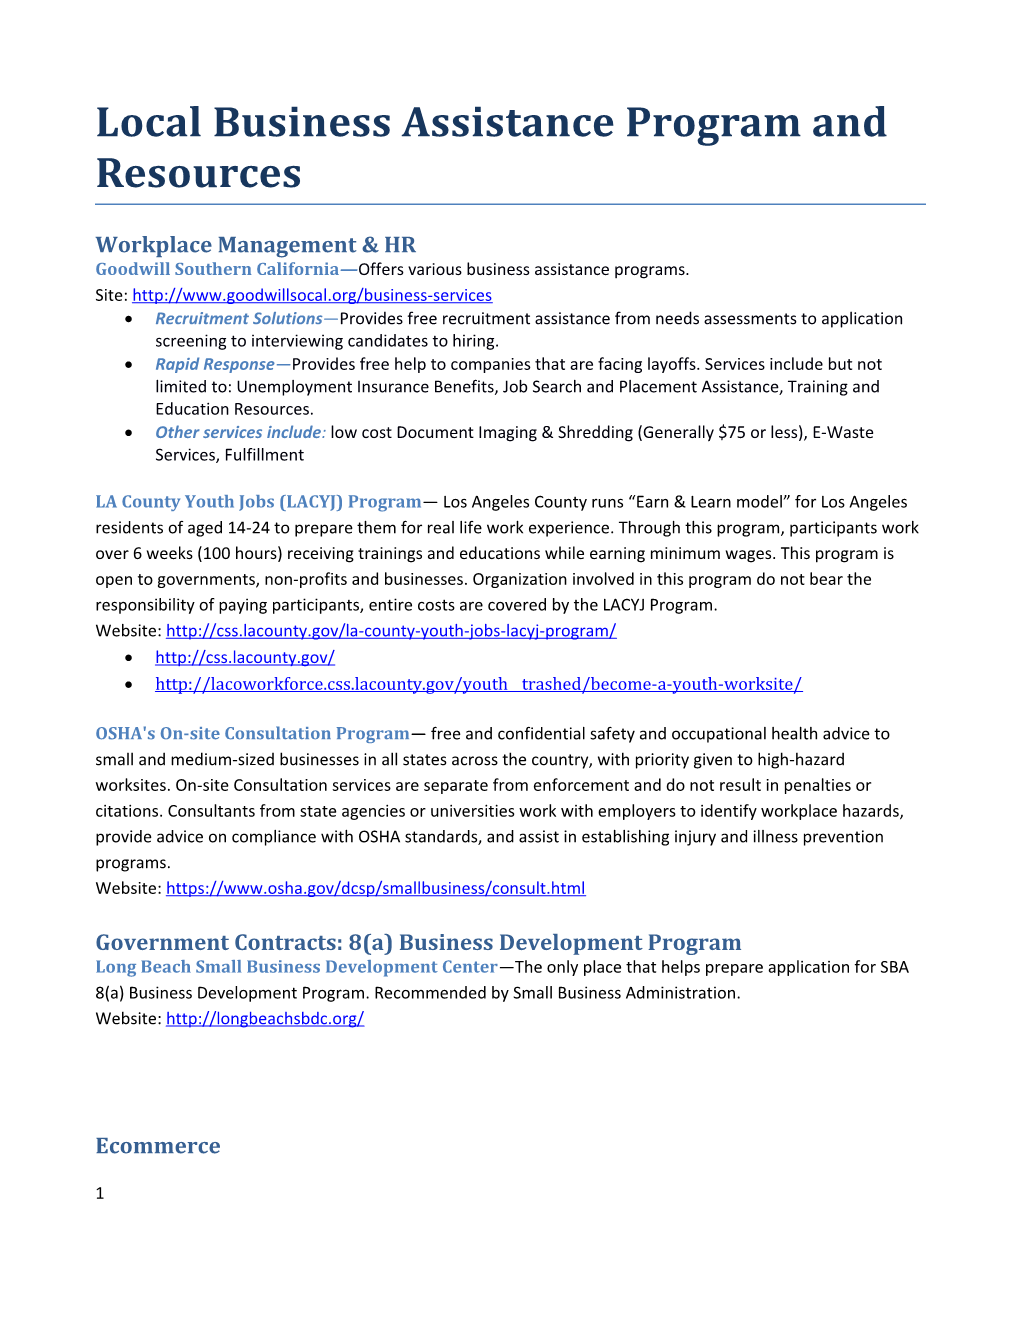 Local Business Assistance Programs and Tools